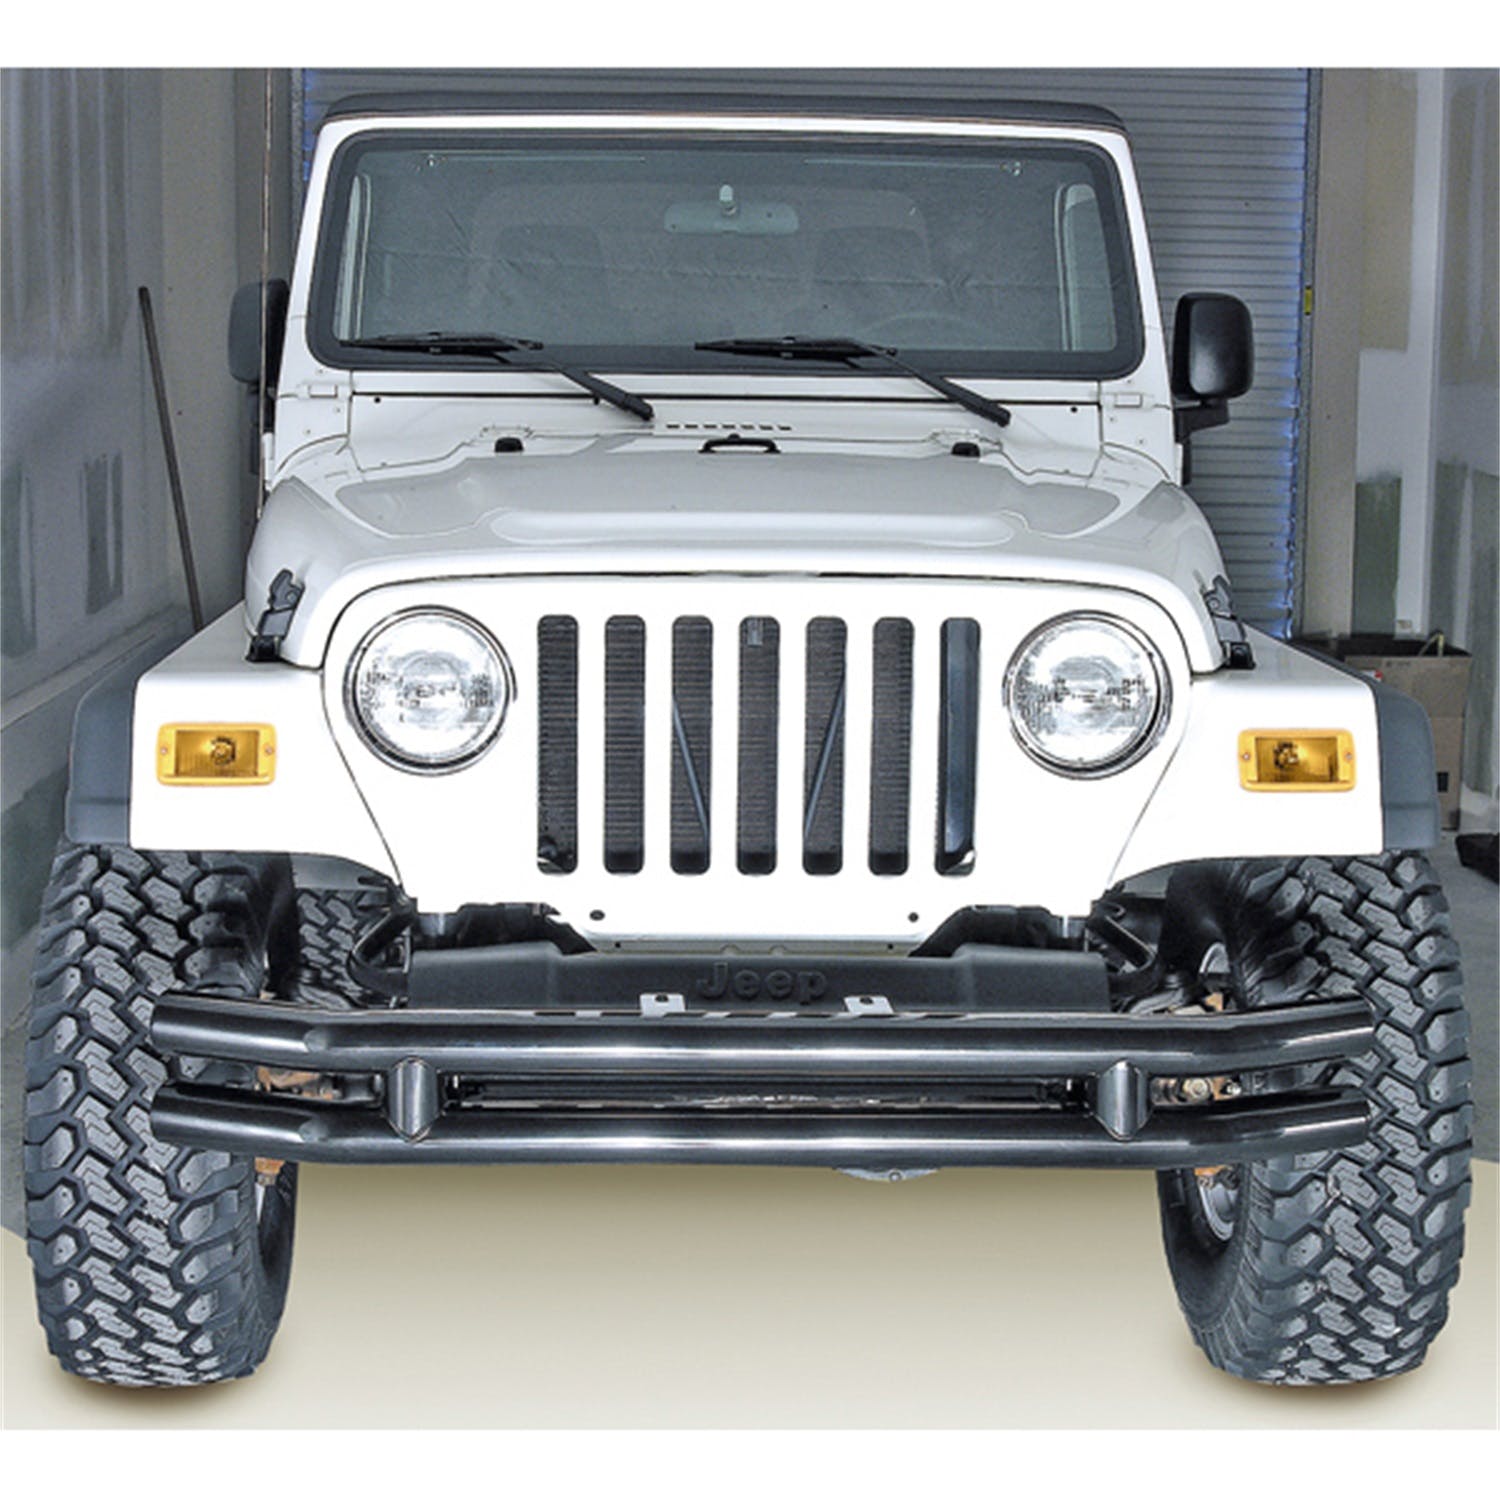 Rugged Ridge 11560.02 Double Tube Front Bumper, 3in